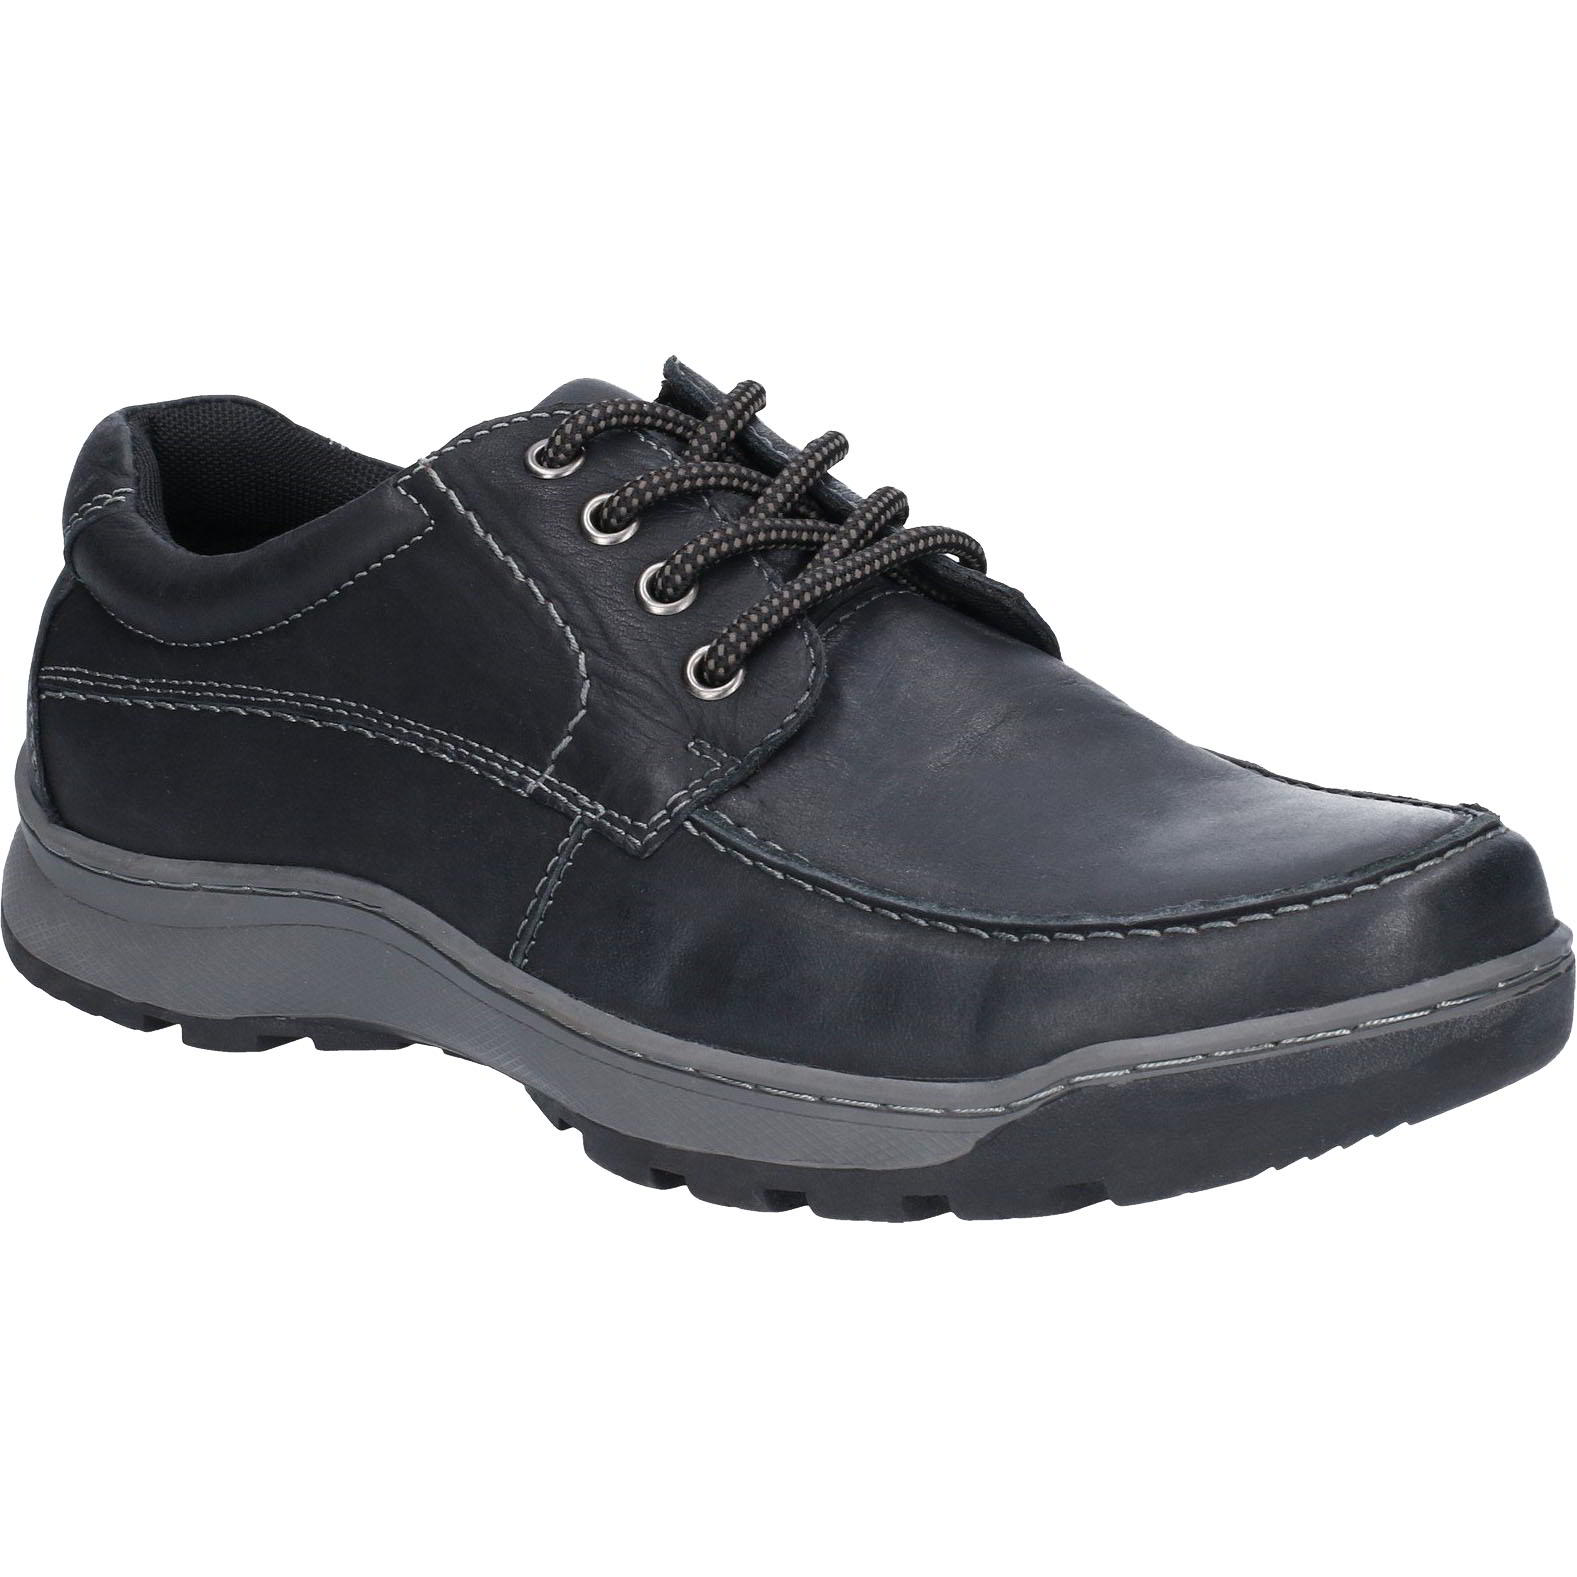 Hush Puppies Men's Tucker Leather Lace Up Shoes - Black - UK 10